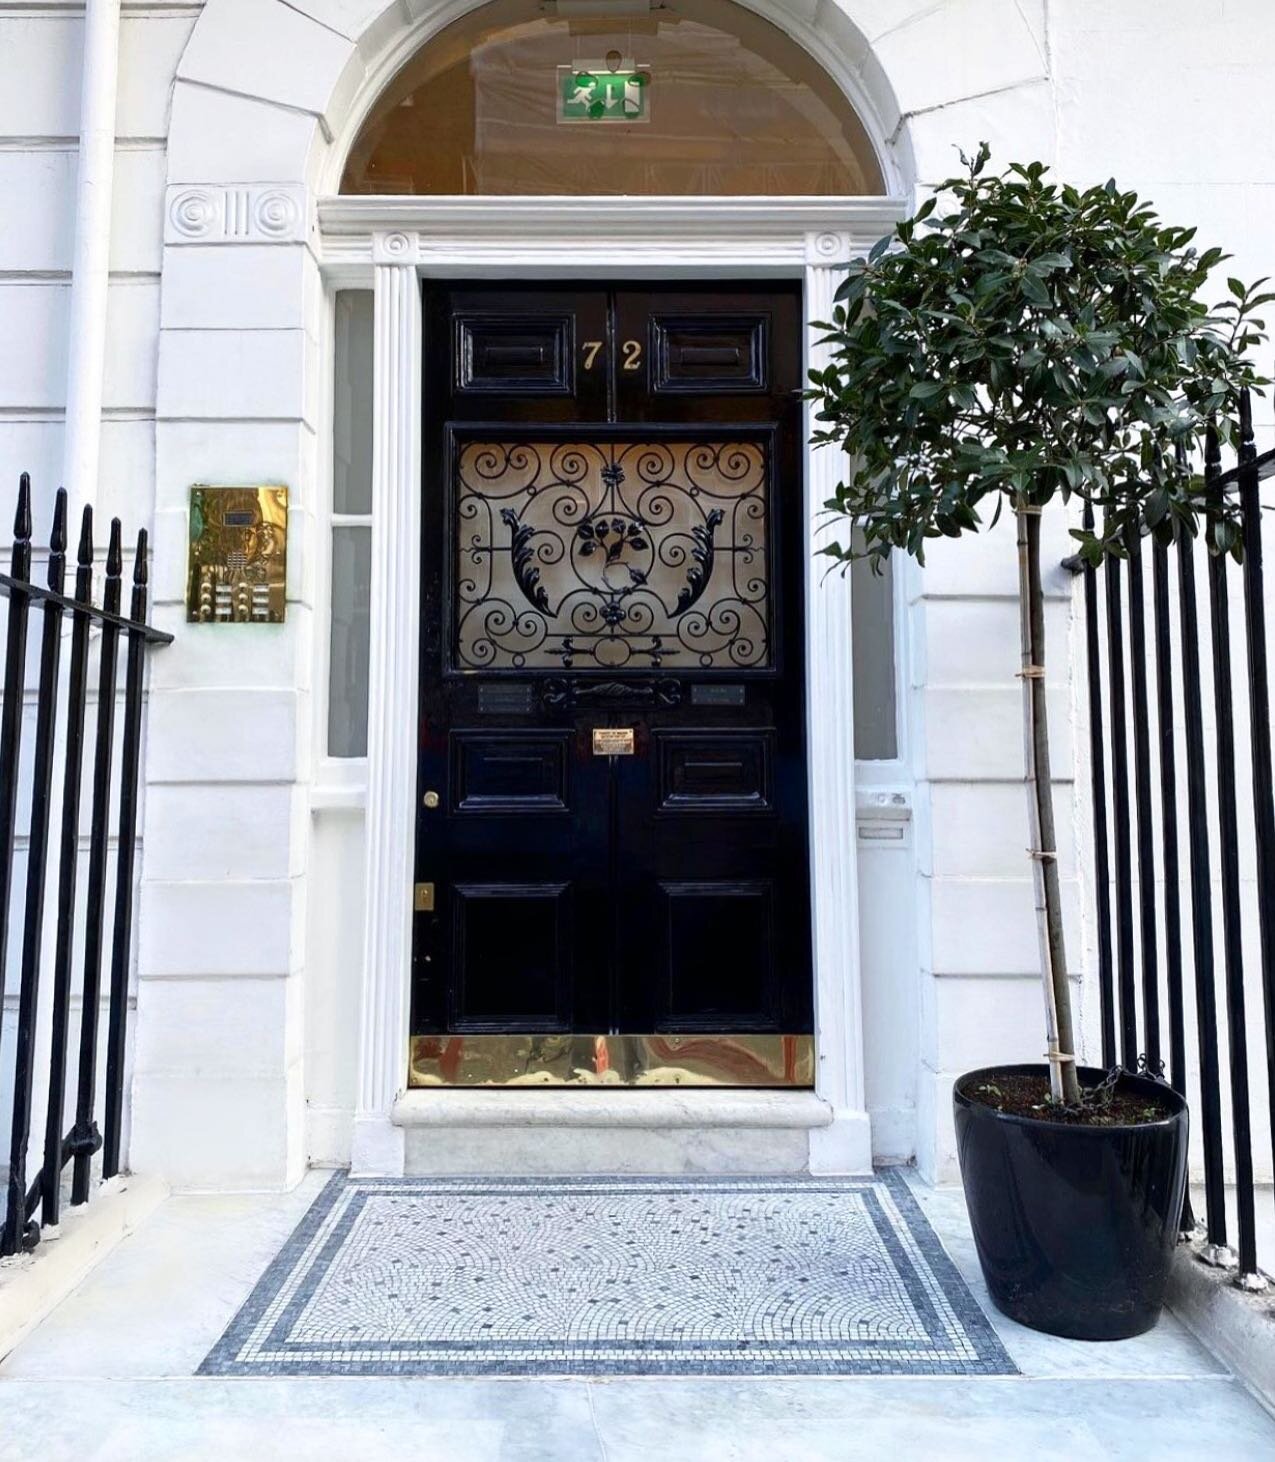 Hello and welcome to Carling Dental located at number 72 Harley Street, London. ⁣
⁣
Dr Michael Carling established the practice in 2004 and since then the team has expanded.
⁣
At Carling Dental we provide the highest quality of care to our patients. 